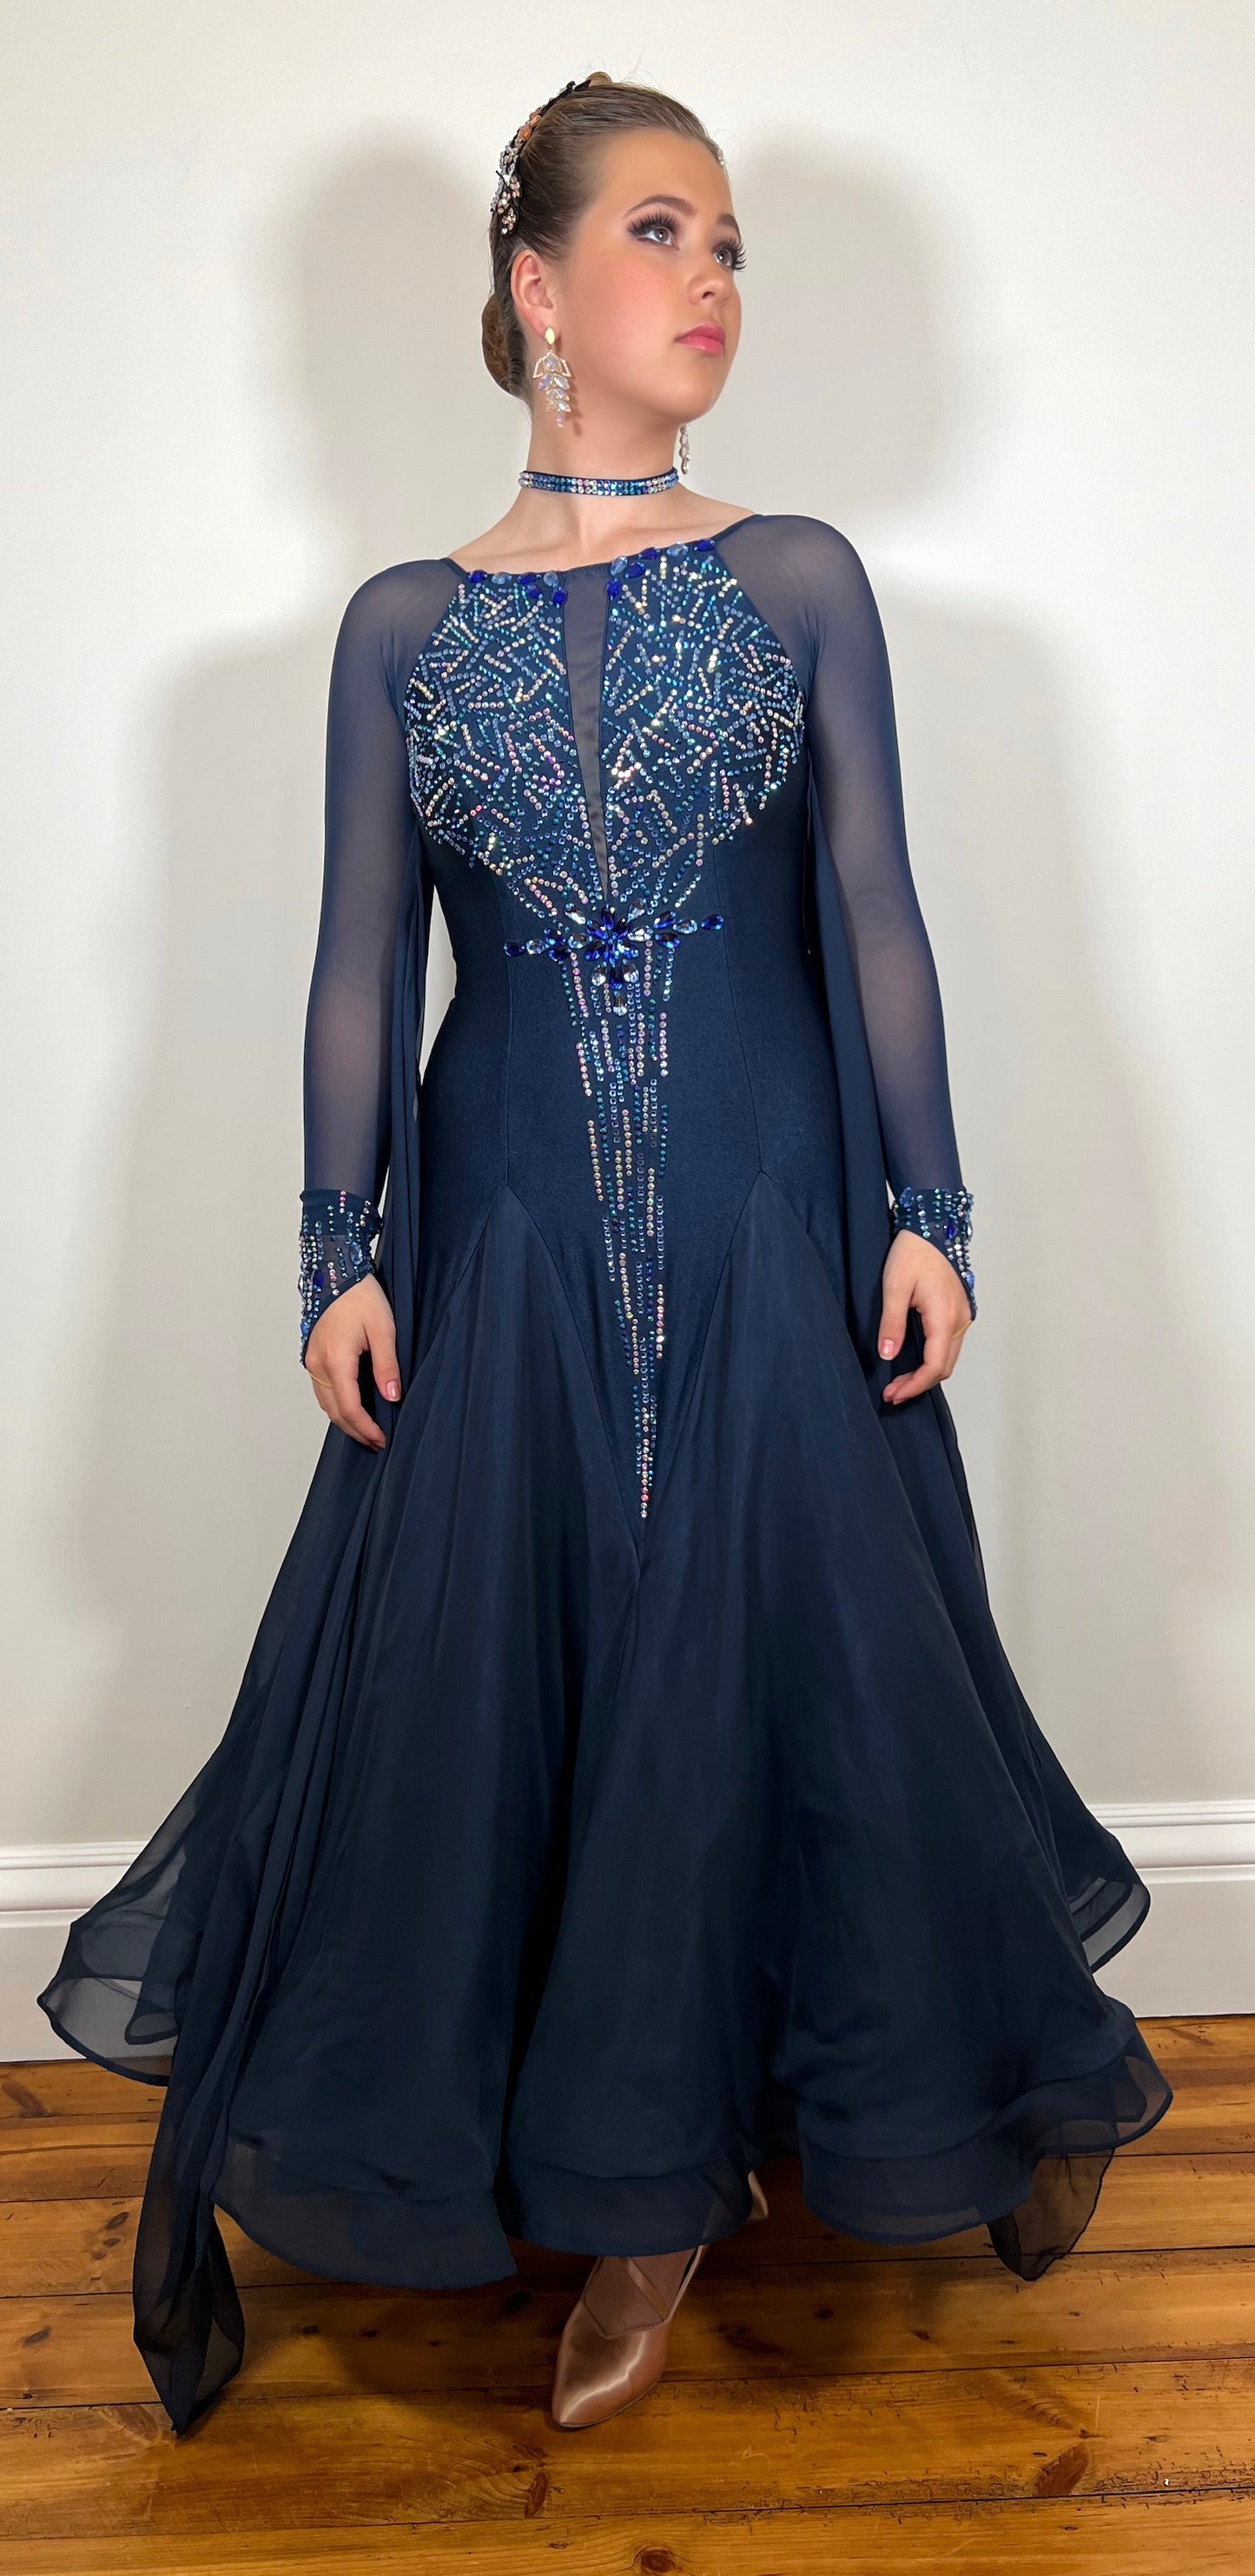 0333 Midnight Blue Competition Ballroom Dress. Stoned with sapphire, capri blue & AB stones. Sophisticated & demure.